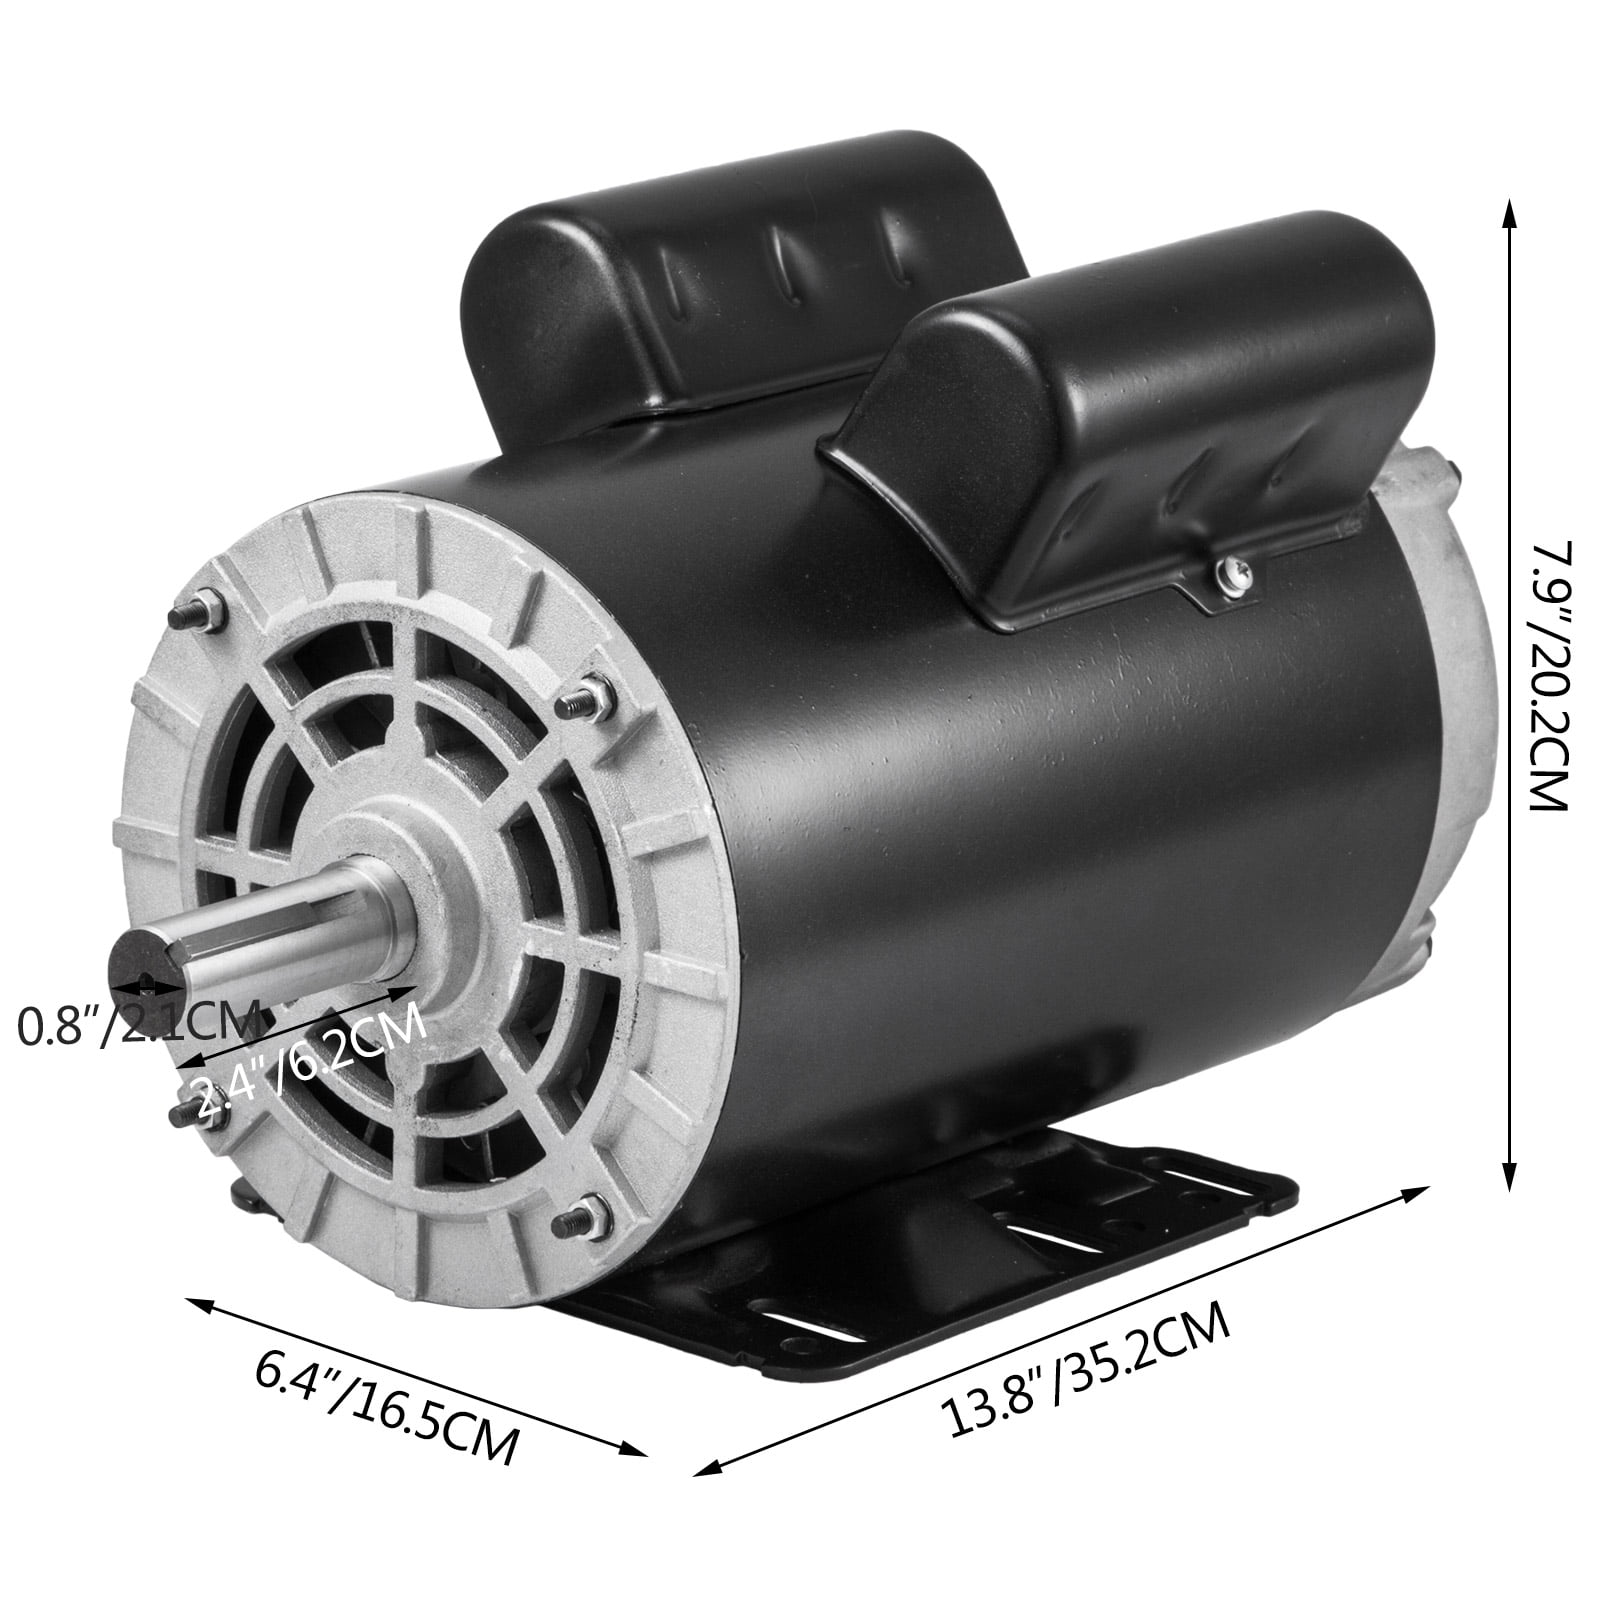 Details about   5HP SPL Air Compressor 1 Phase 208-230 Volts 3450RPM Electric Motor 5/8" Shaft